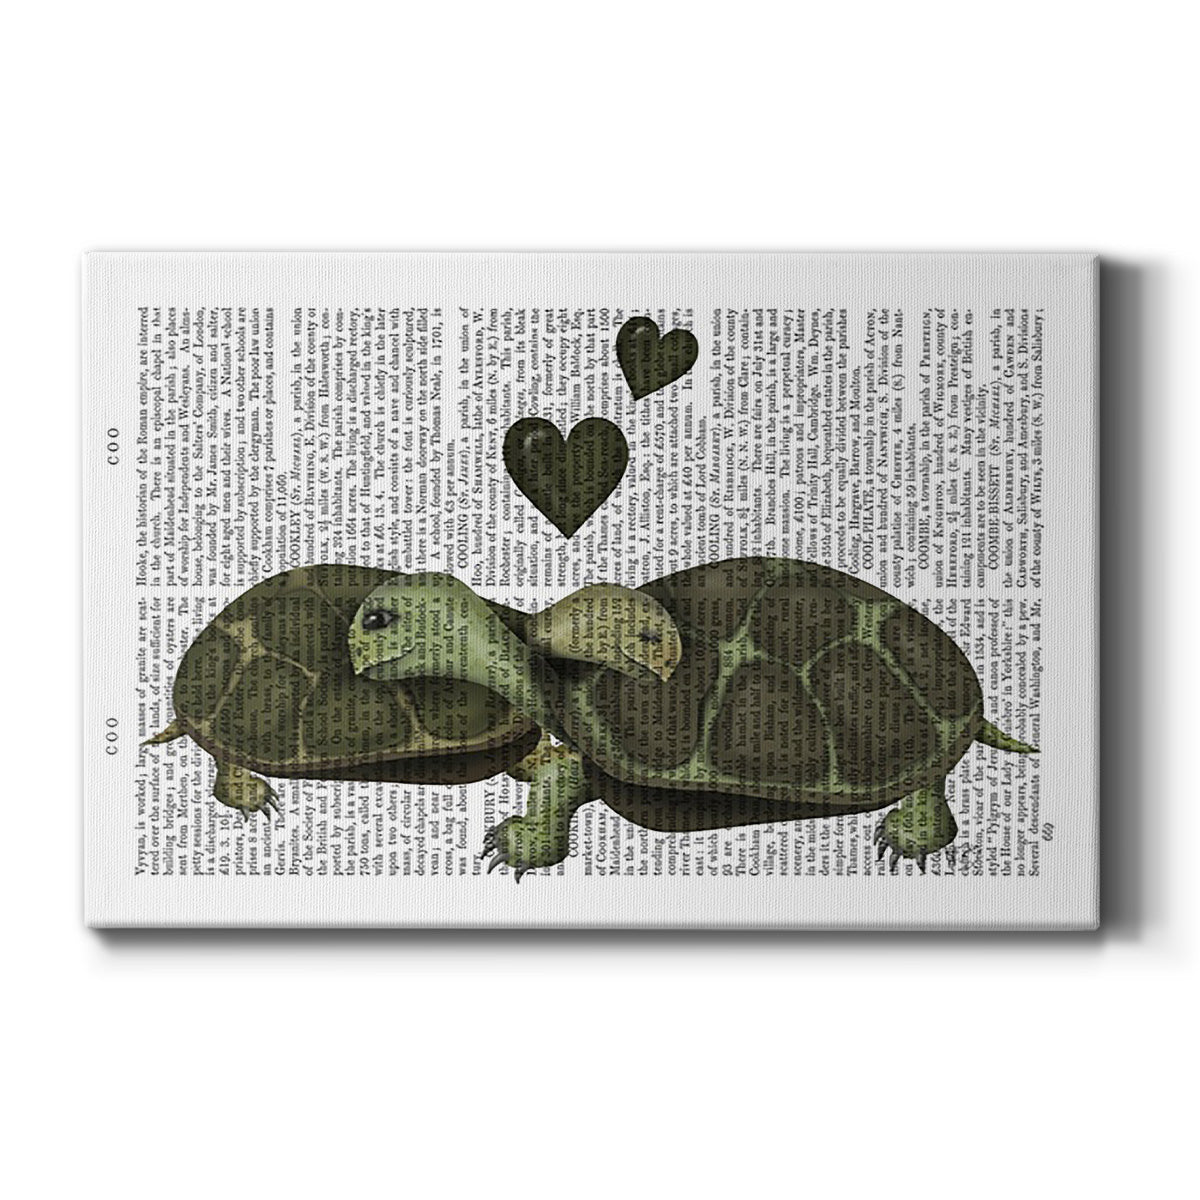 Turtles and Green Hearts